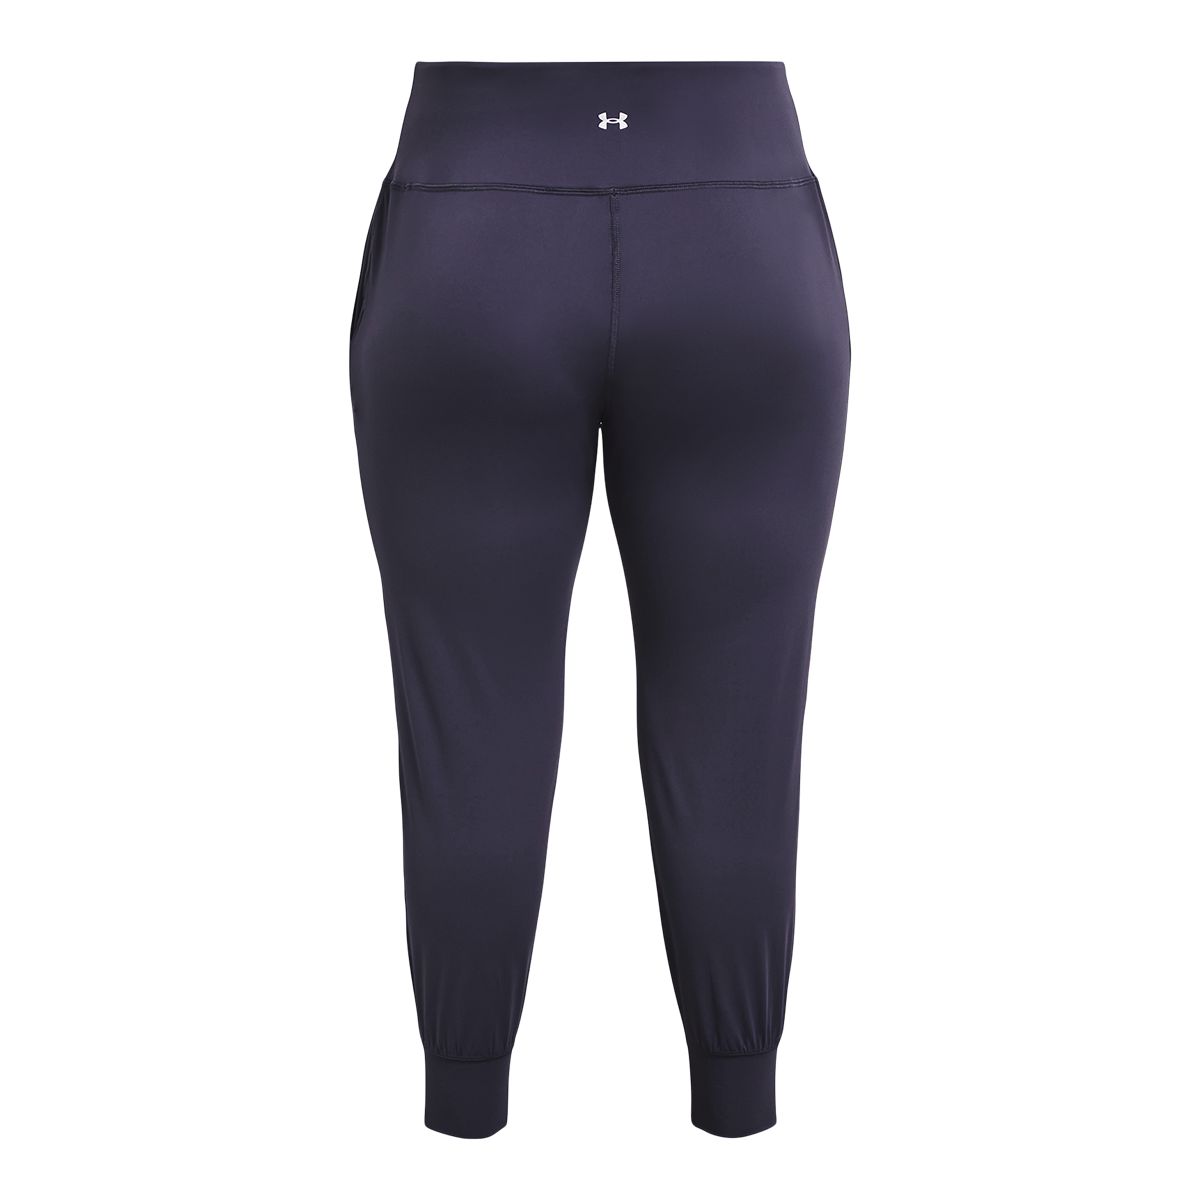 Under Armour Women's Meridian Joggers